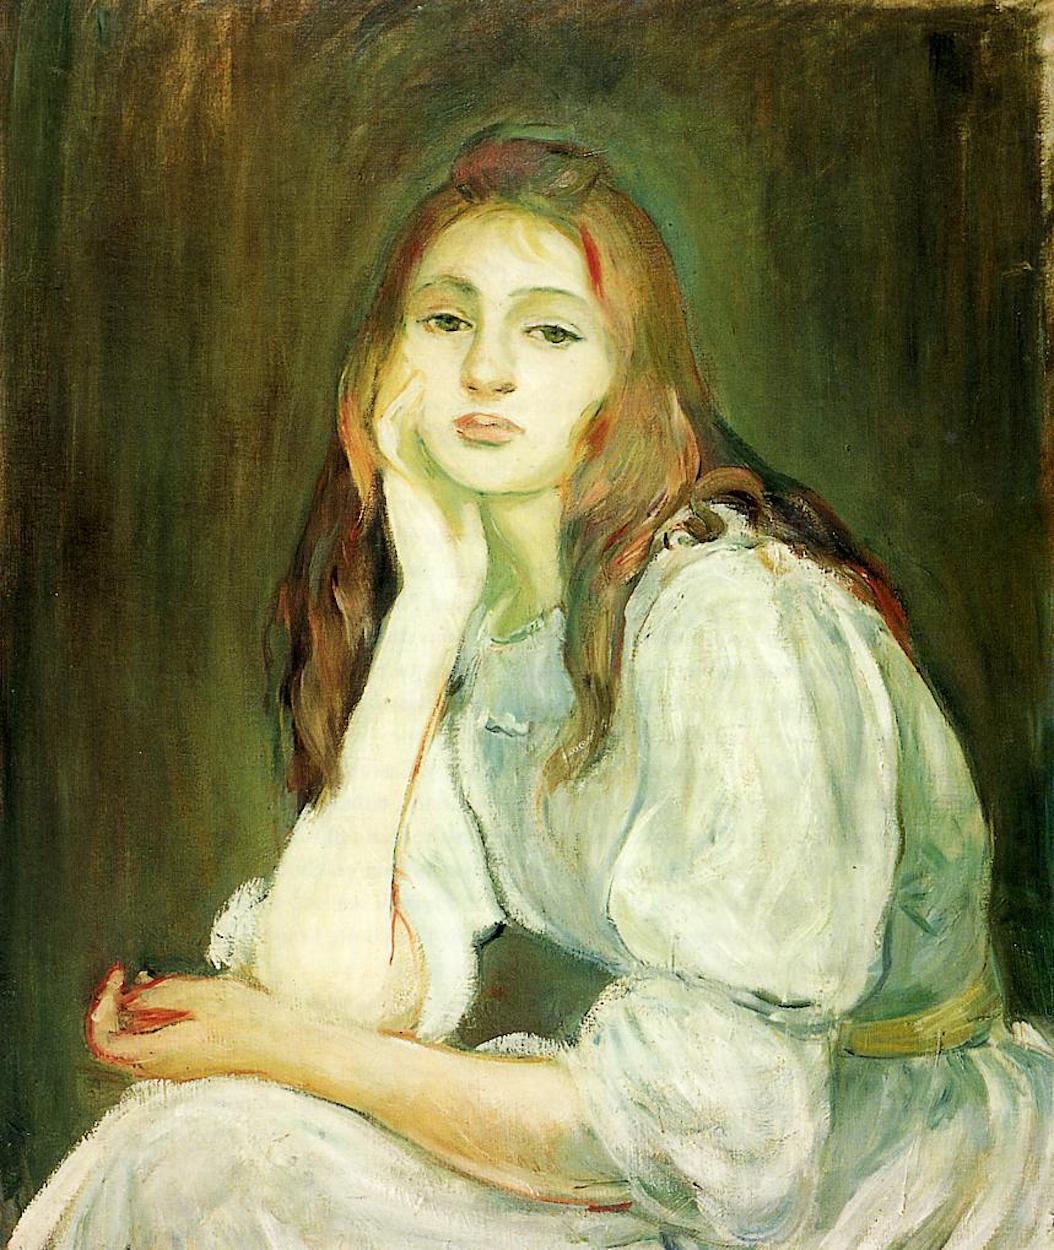 Julie Daydreaming by Berthe Morisot - 1894 - 65 × 54 cm private collection